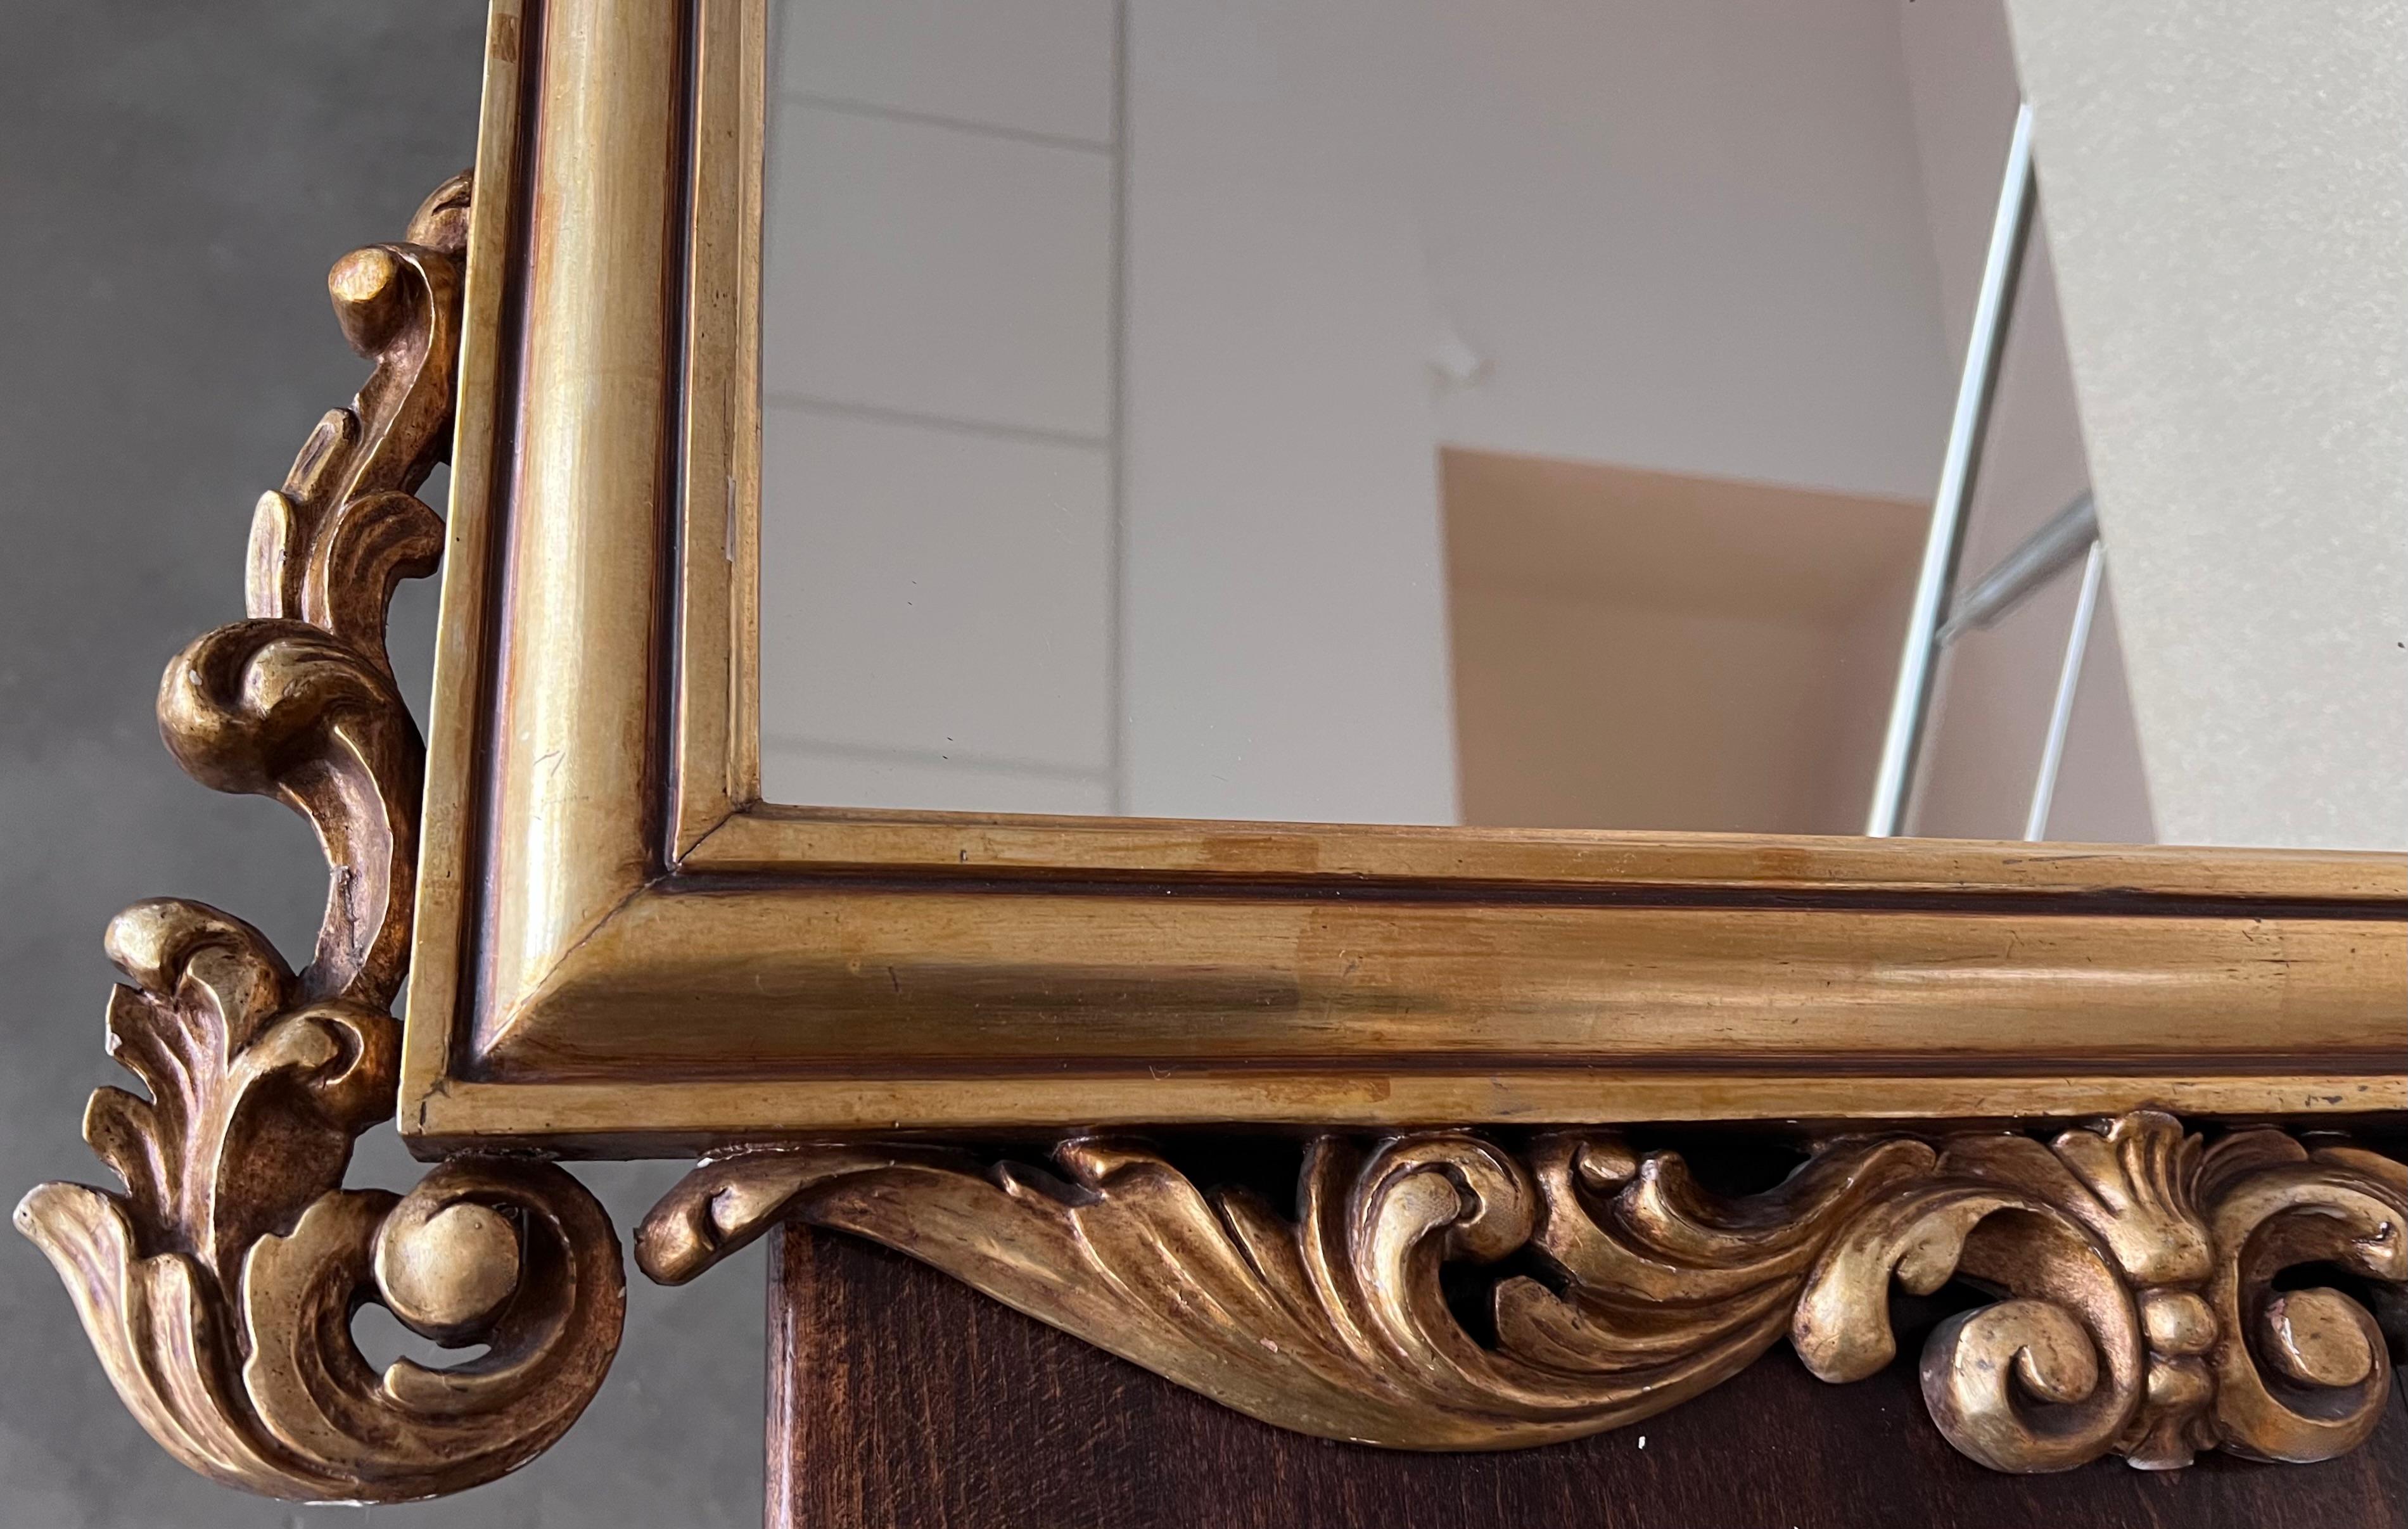 20th French Empire Period Carved Gilt Wood Rectangular Mirror with Crest In Good Condition For Sale In Miami, FL